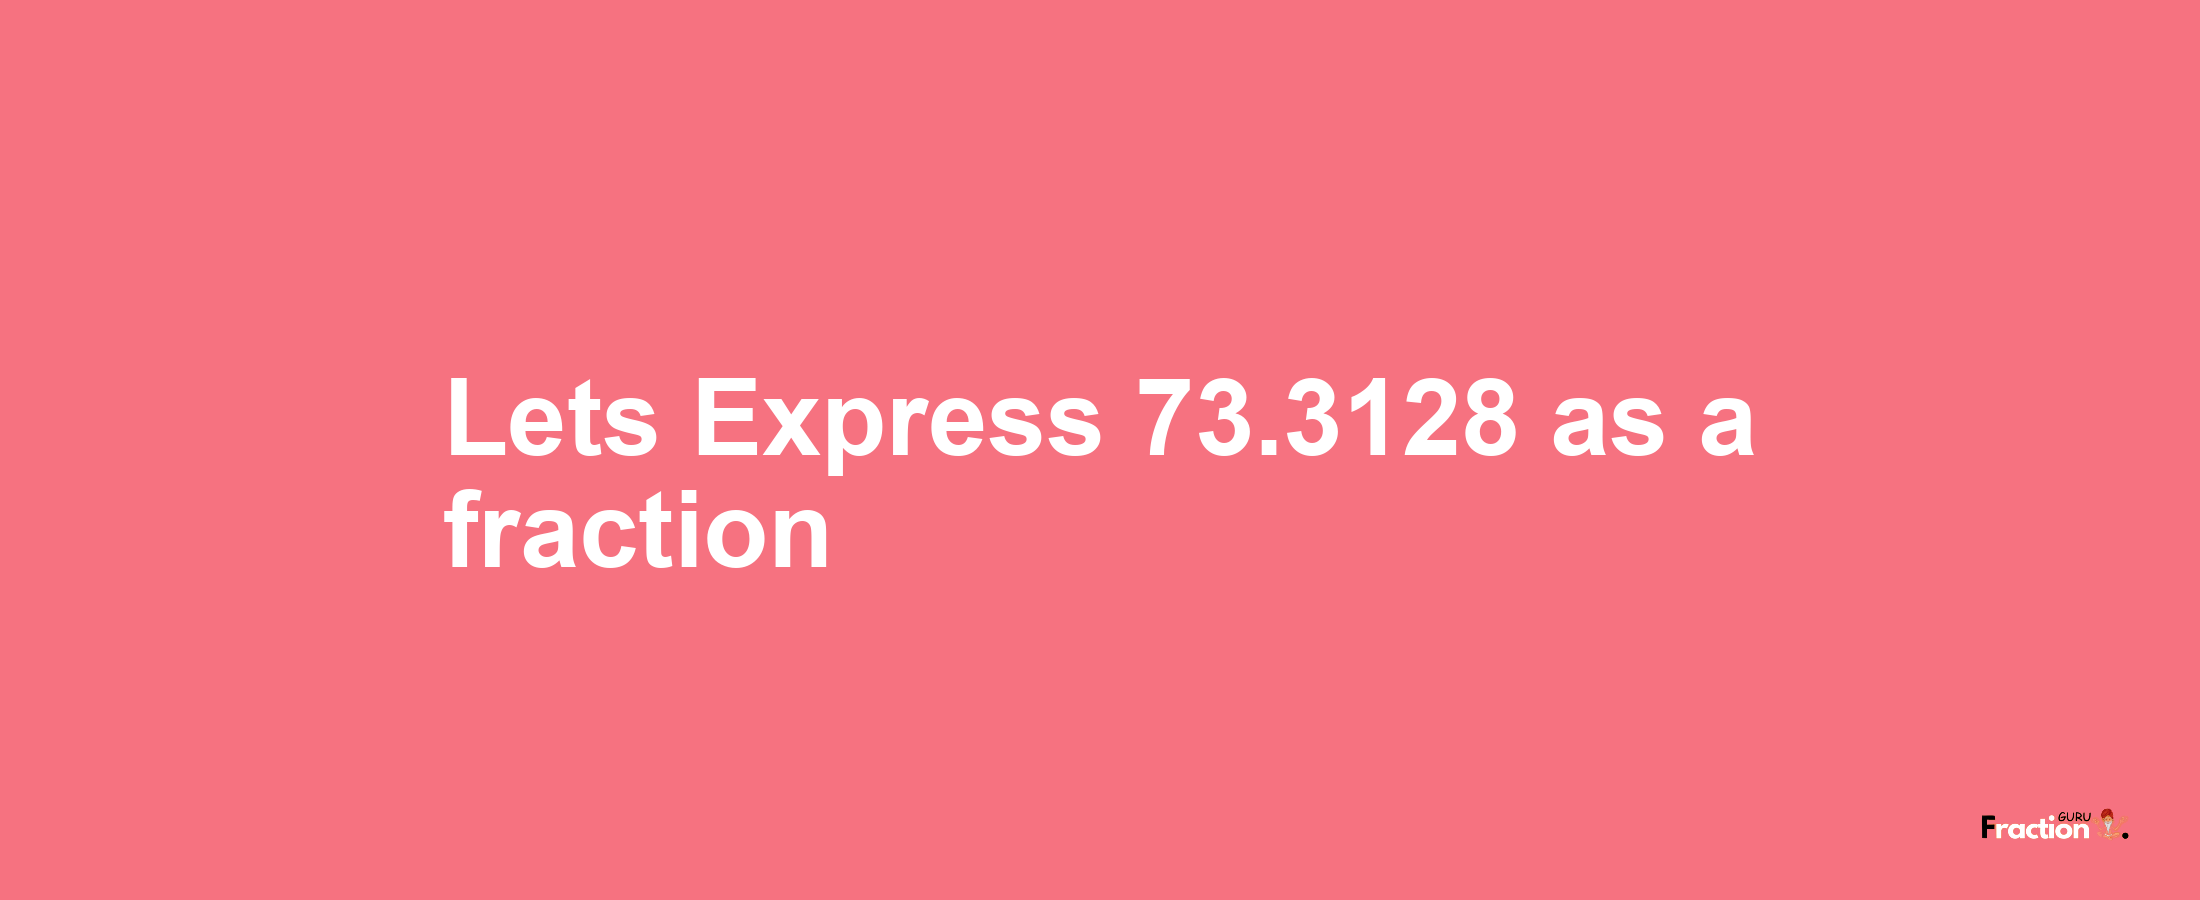 Lets Express 73.3128 as afraction